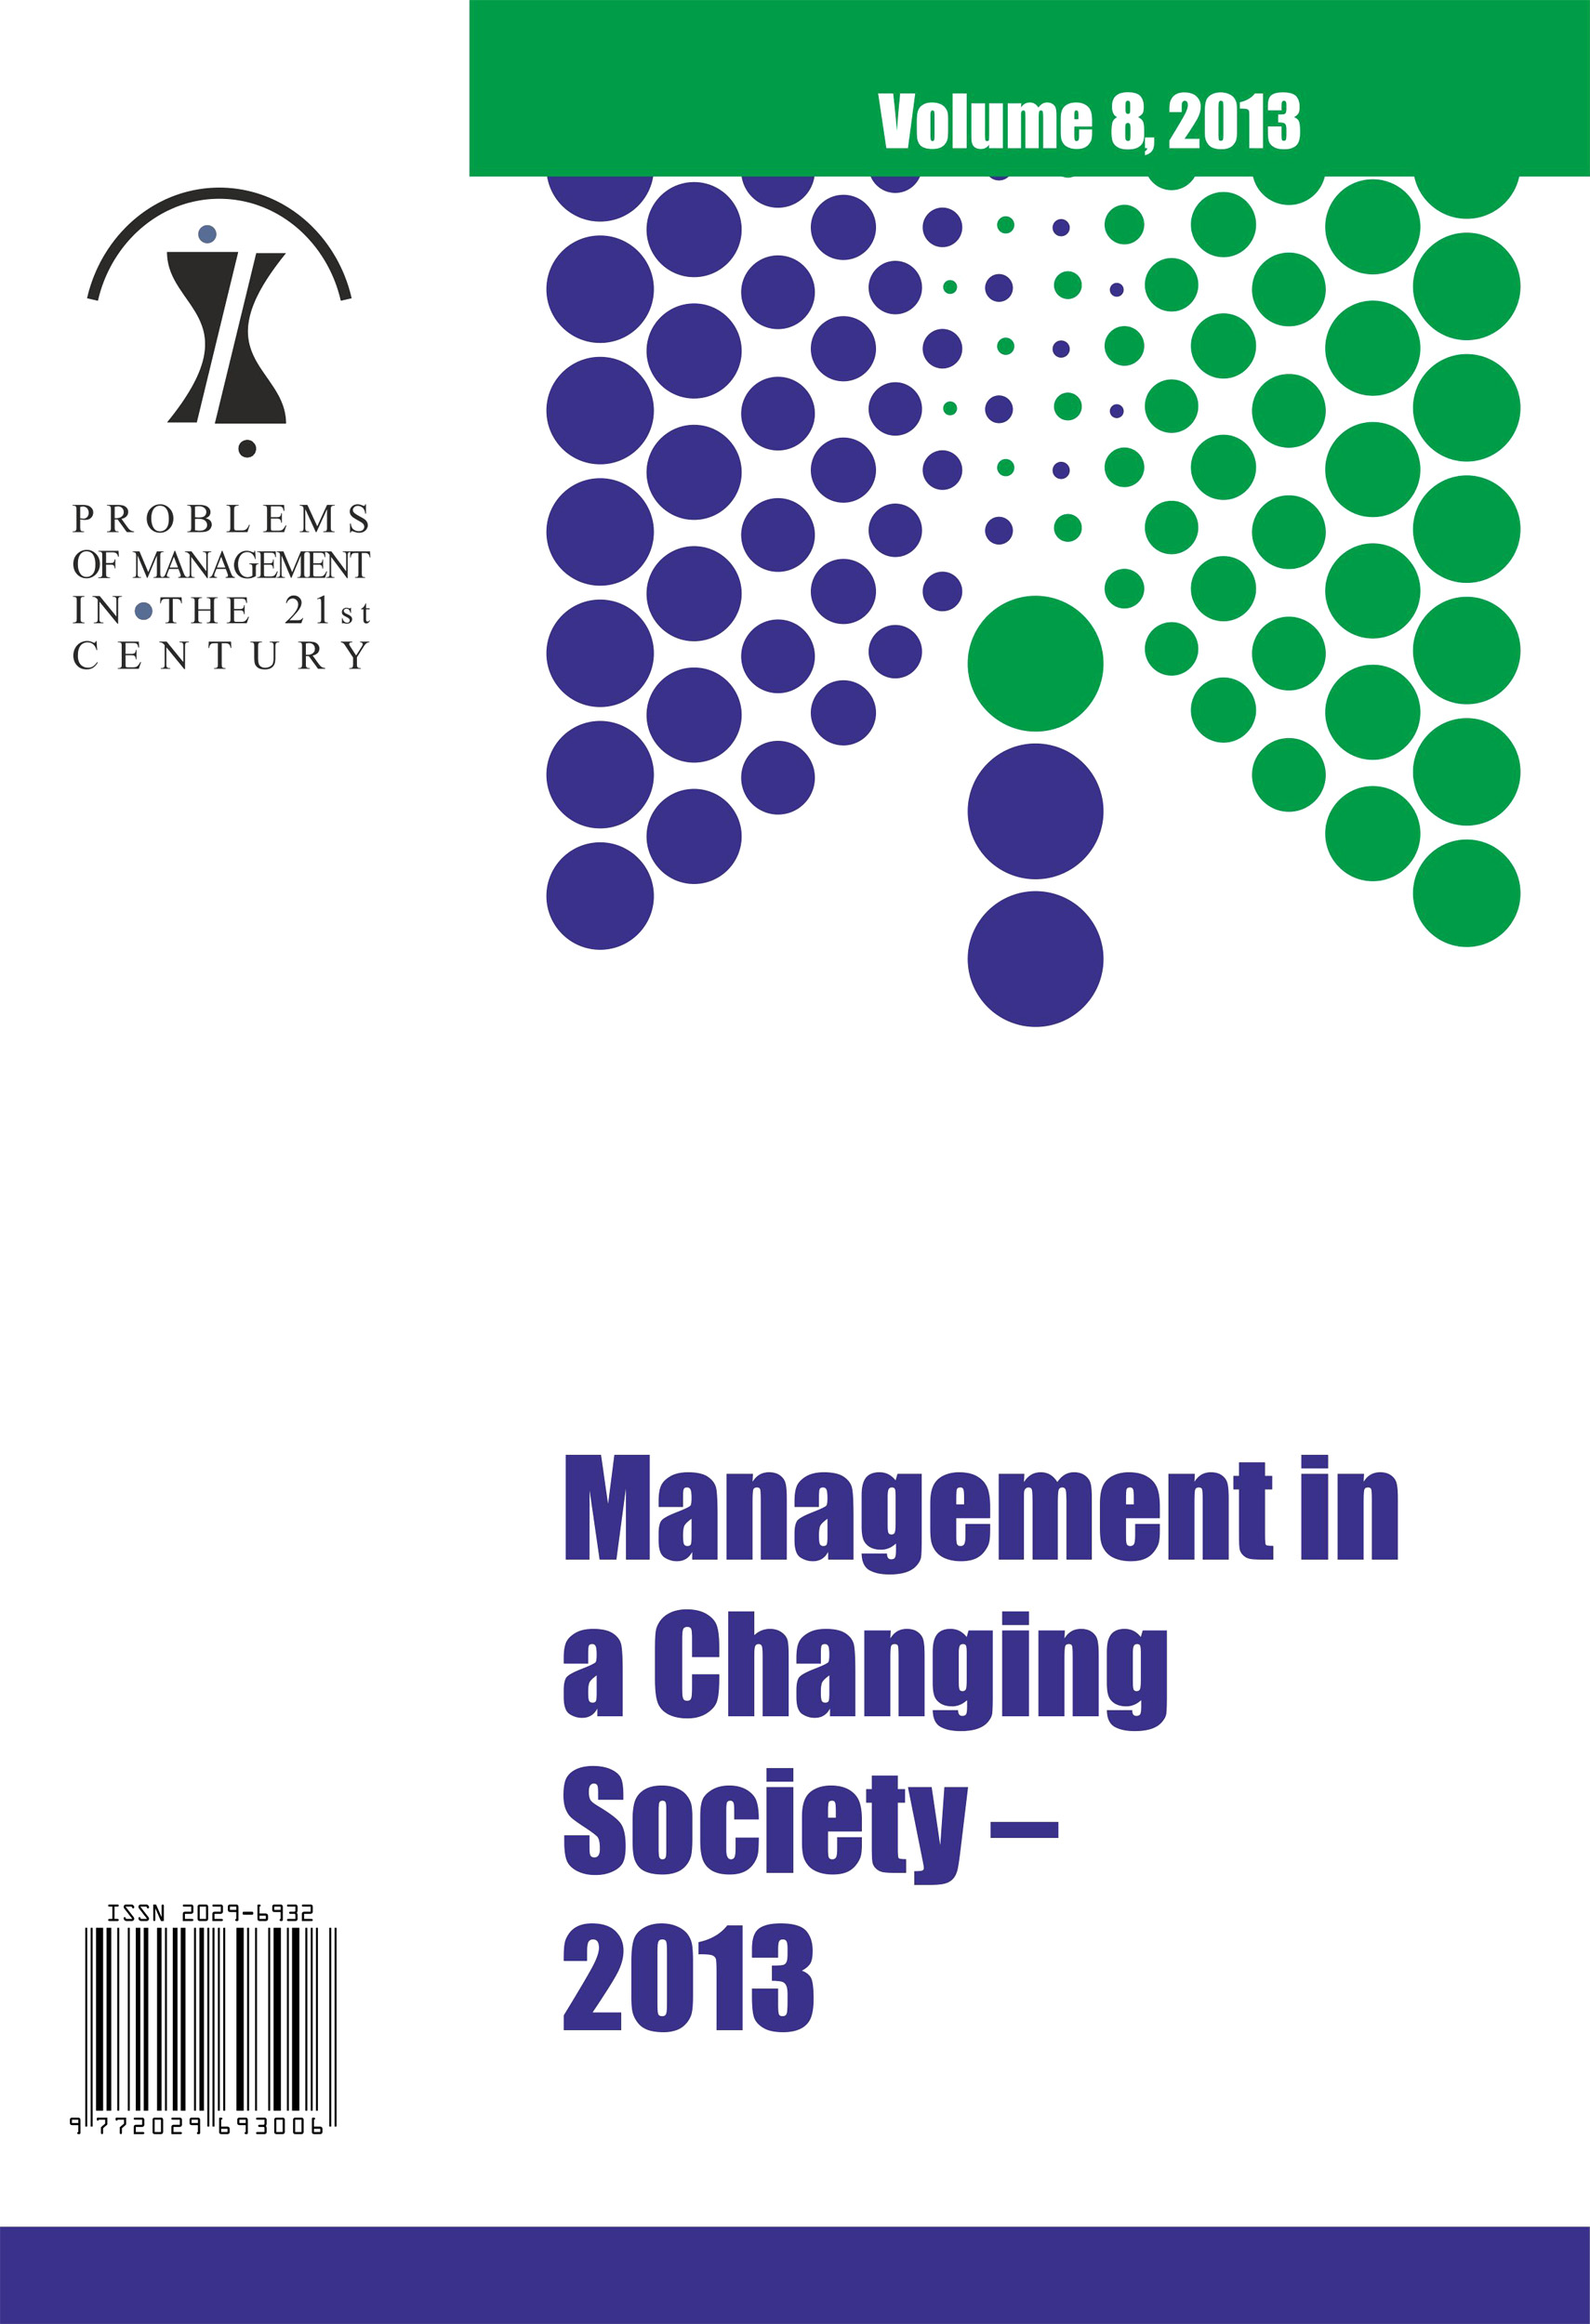 RELATIONS BETWEEN ORGANIZATIONAL EFFECTIVENESS AND EFFICIENCY IN PUBLIC SECTOR UNITS Cover Image